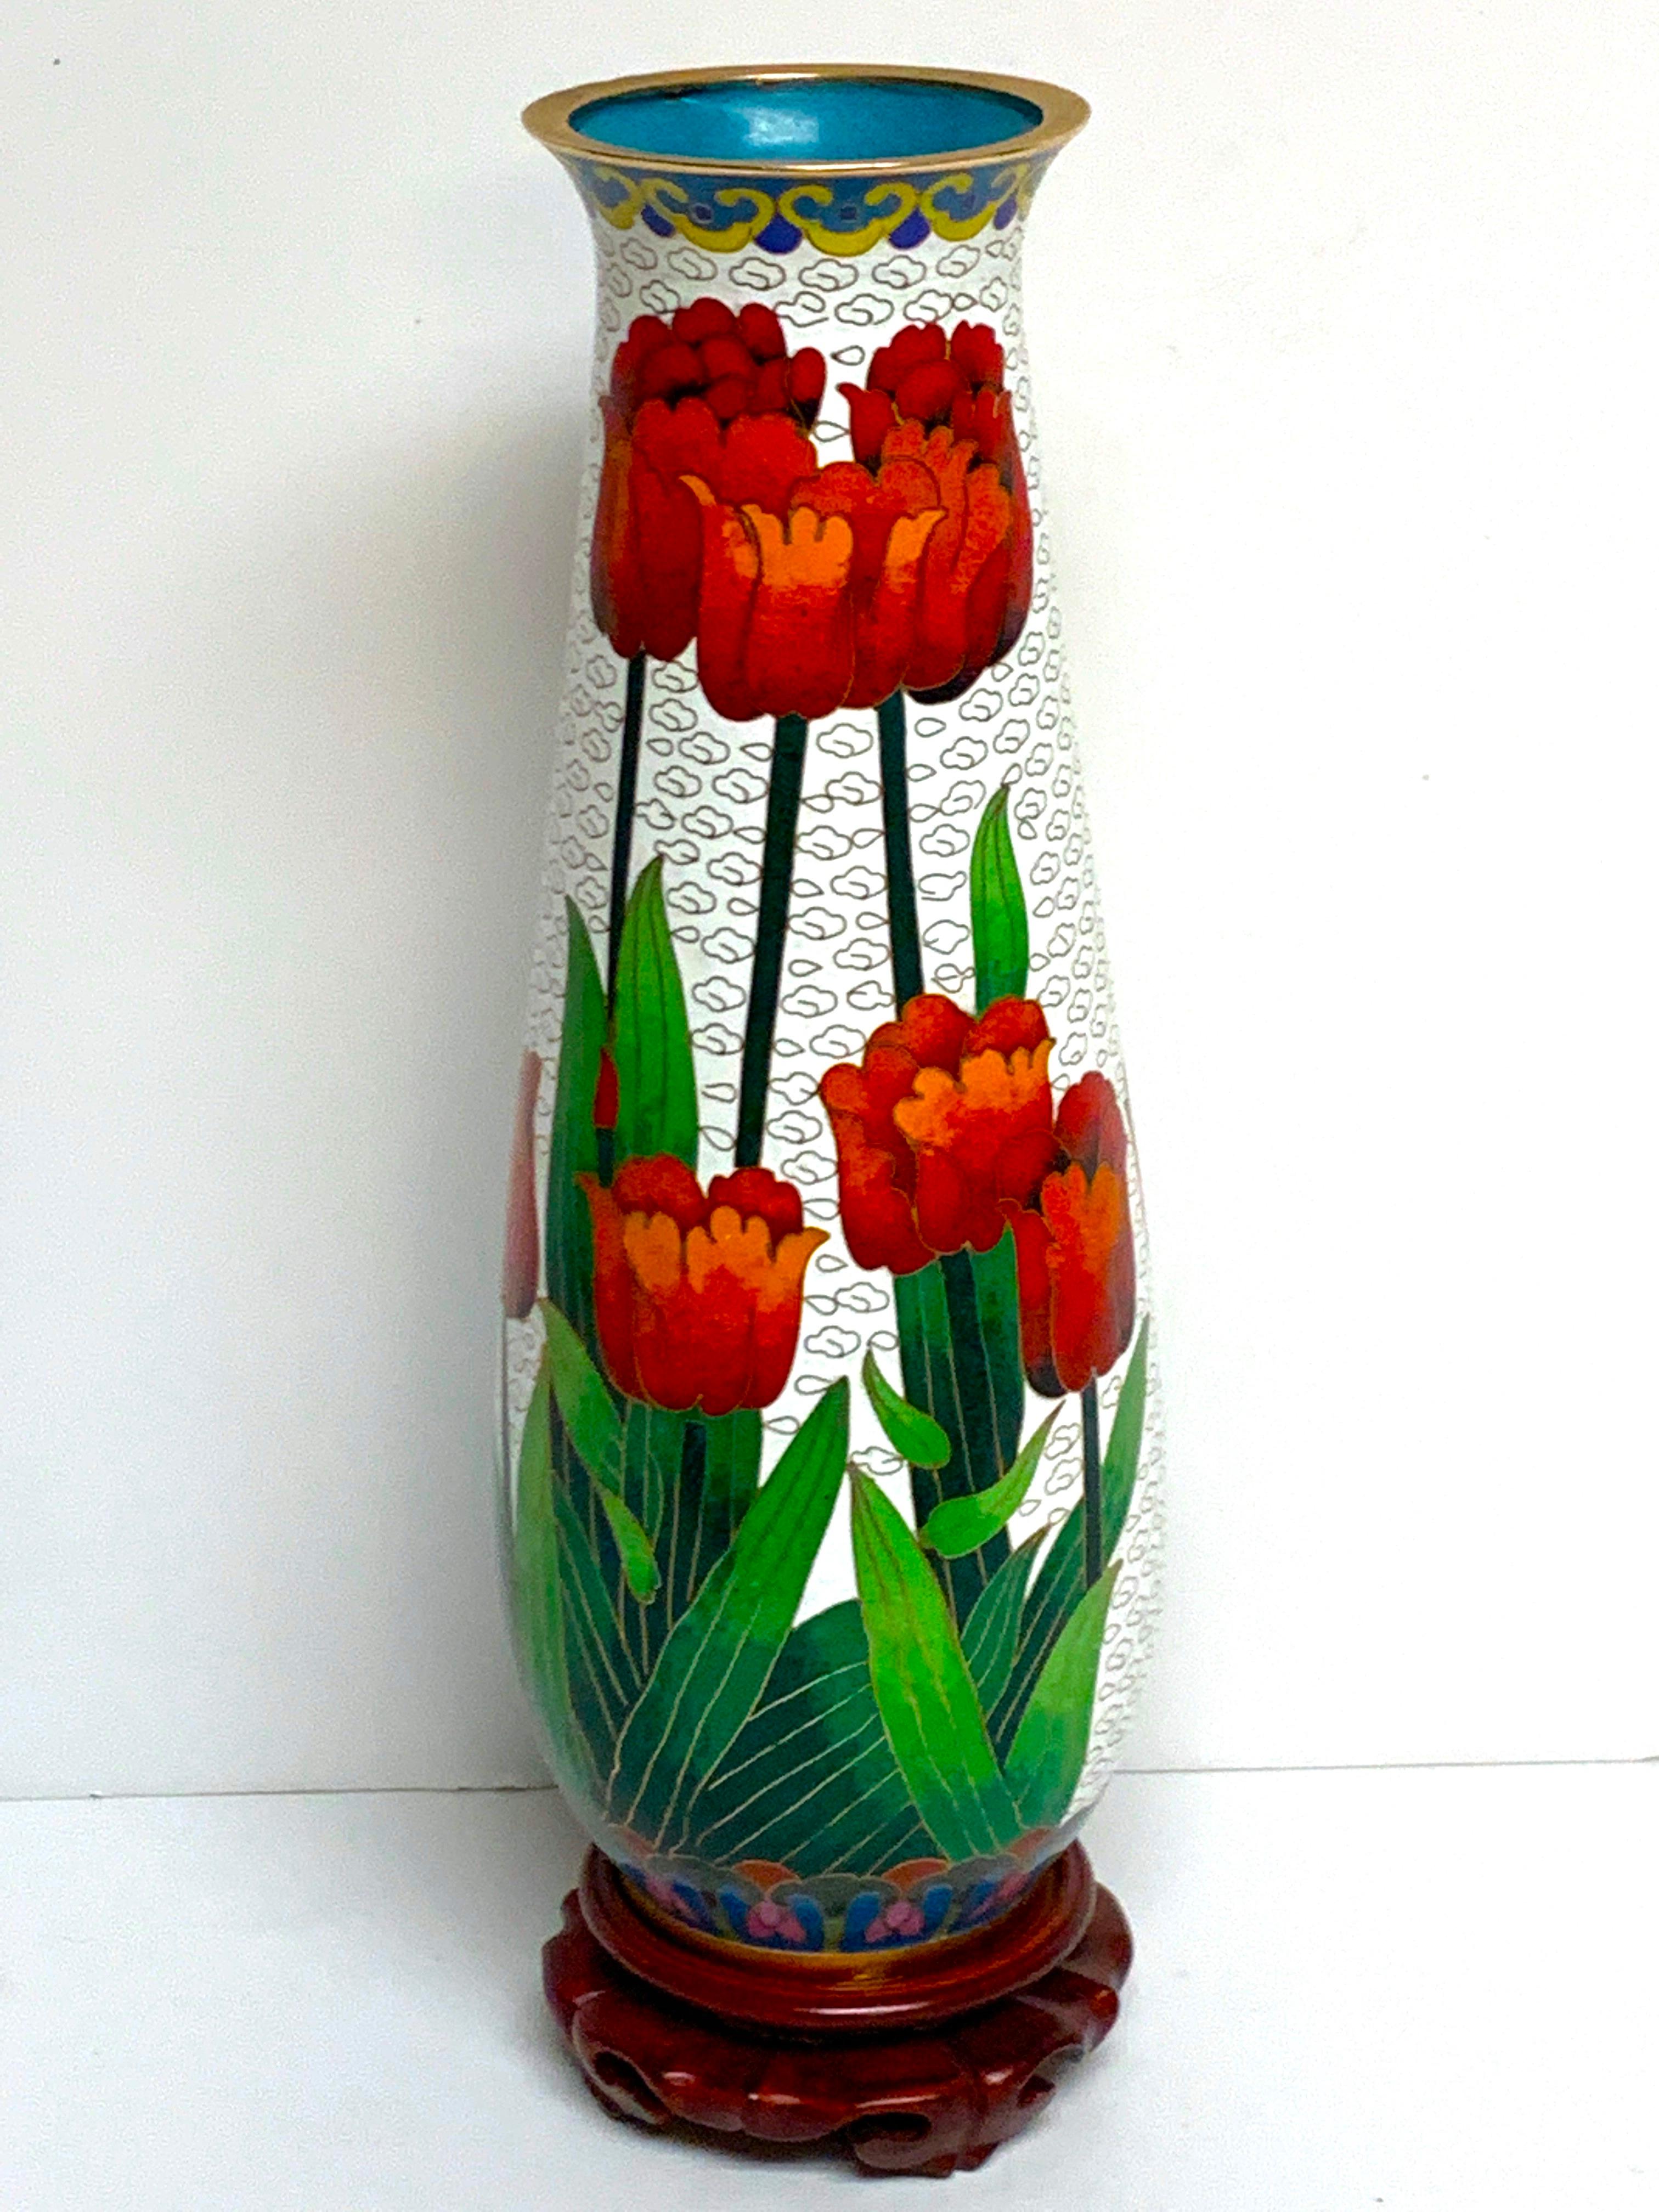 Modern Chinese Cloisonné tulip motif tapered vase and stand, beautifully enamelled with red tulips and white background, complete with carved hardwood stand.
The vase stands 10